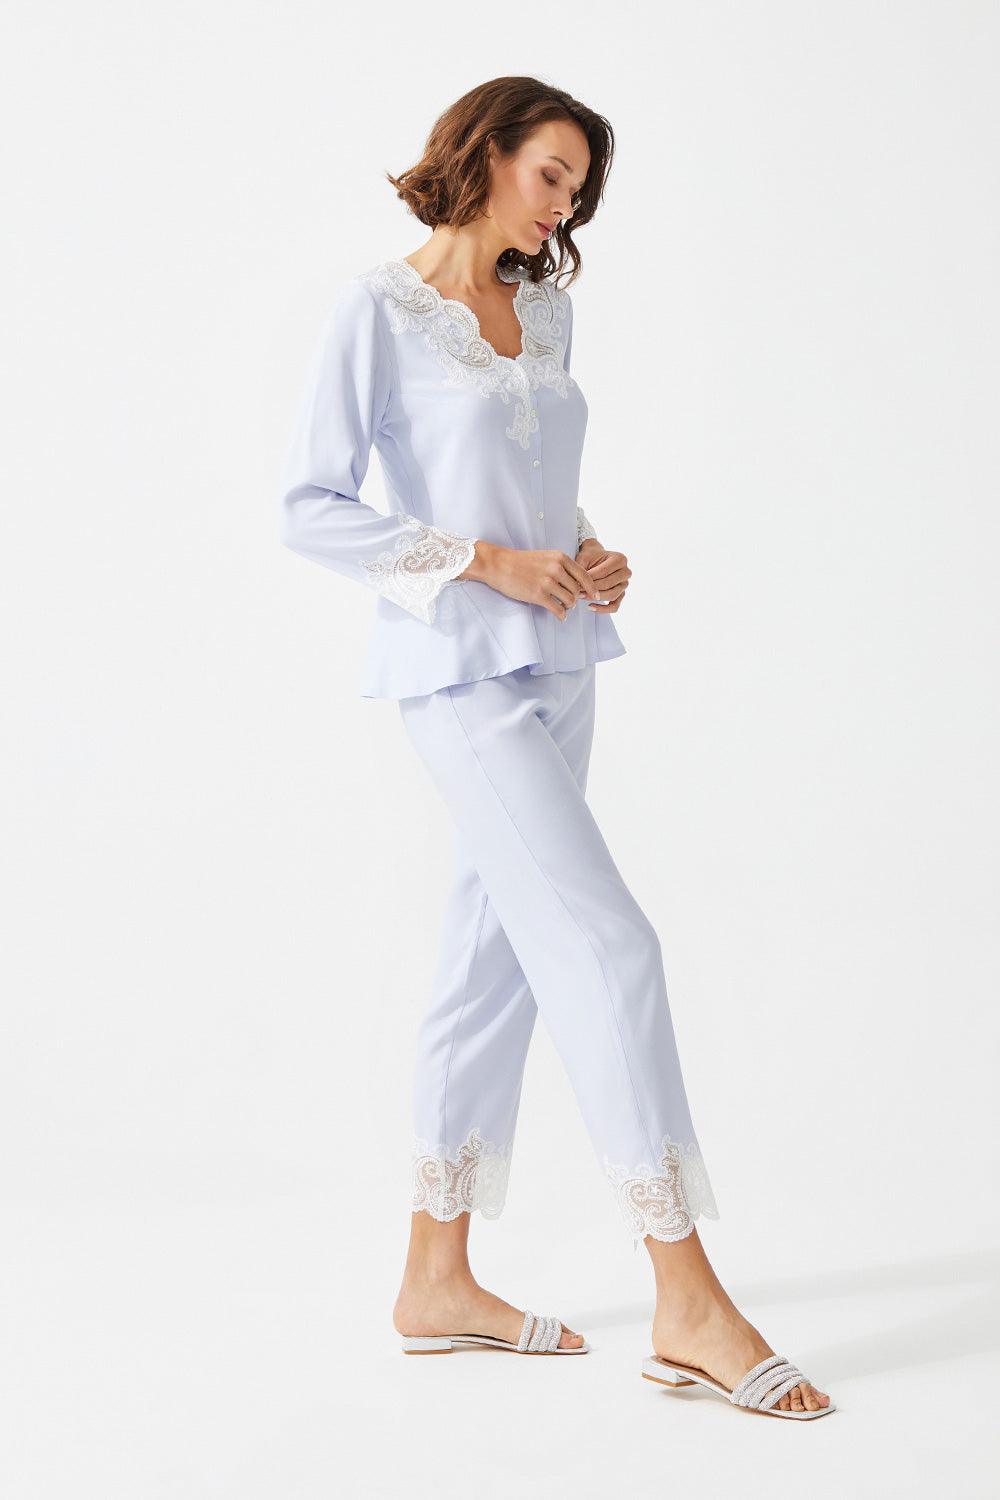 Anemone Trimmed Rayon Full Buttoned Long Sleeve Pyjama Set - Ice Blue - Bocan